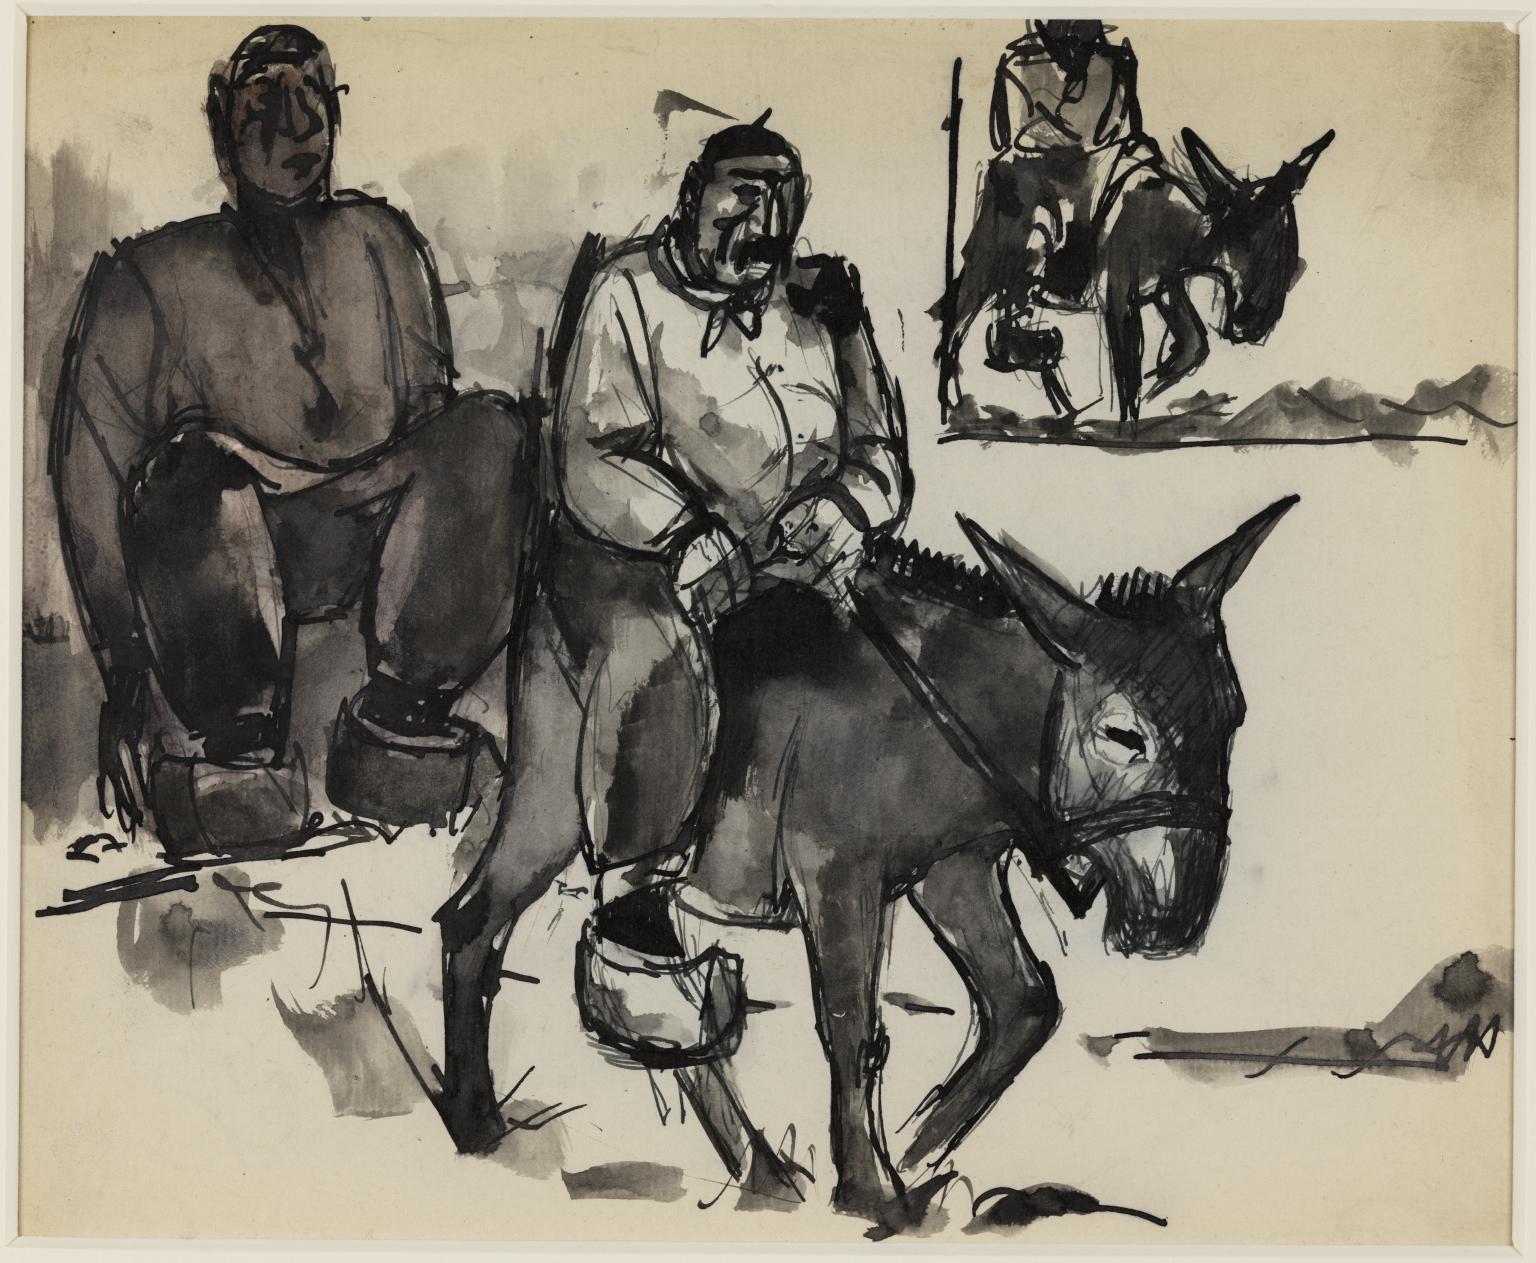 Sketch of a squatting man and a man on a donkey', Josef Herman, 1948 ...